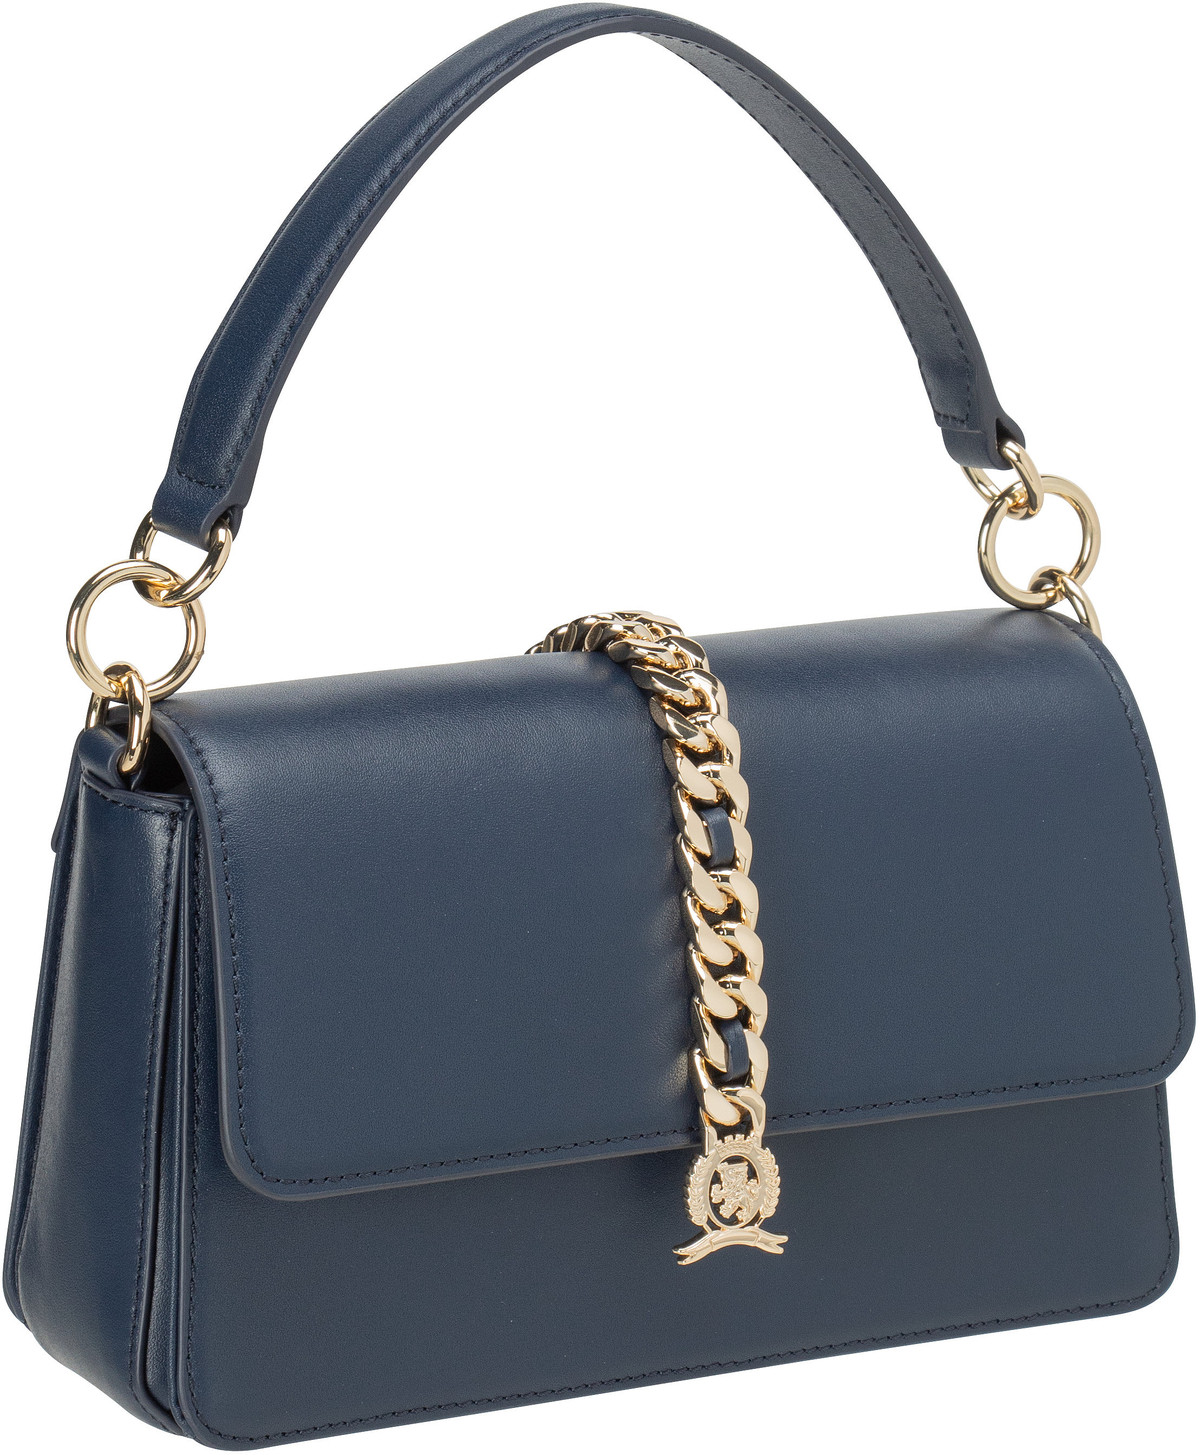 Tommy Hilfiger Luxe Leather Crossover FA23  in Space Blue (2.9 Liter), Handtasche